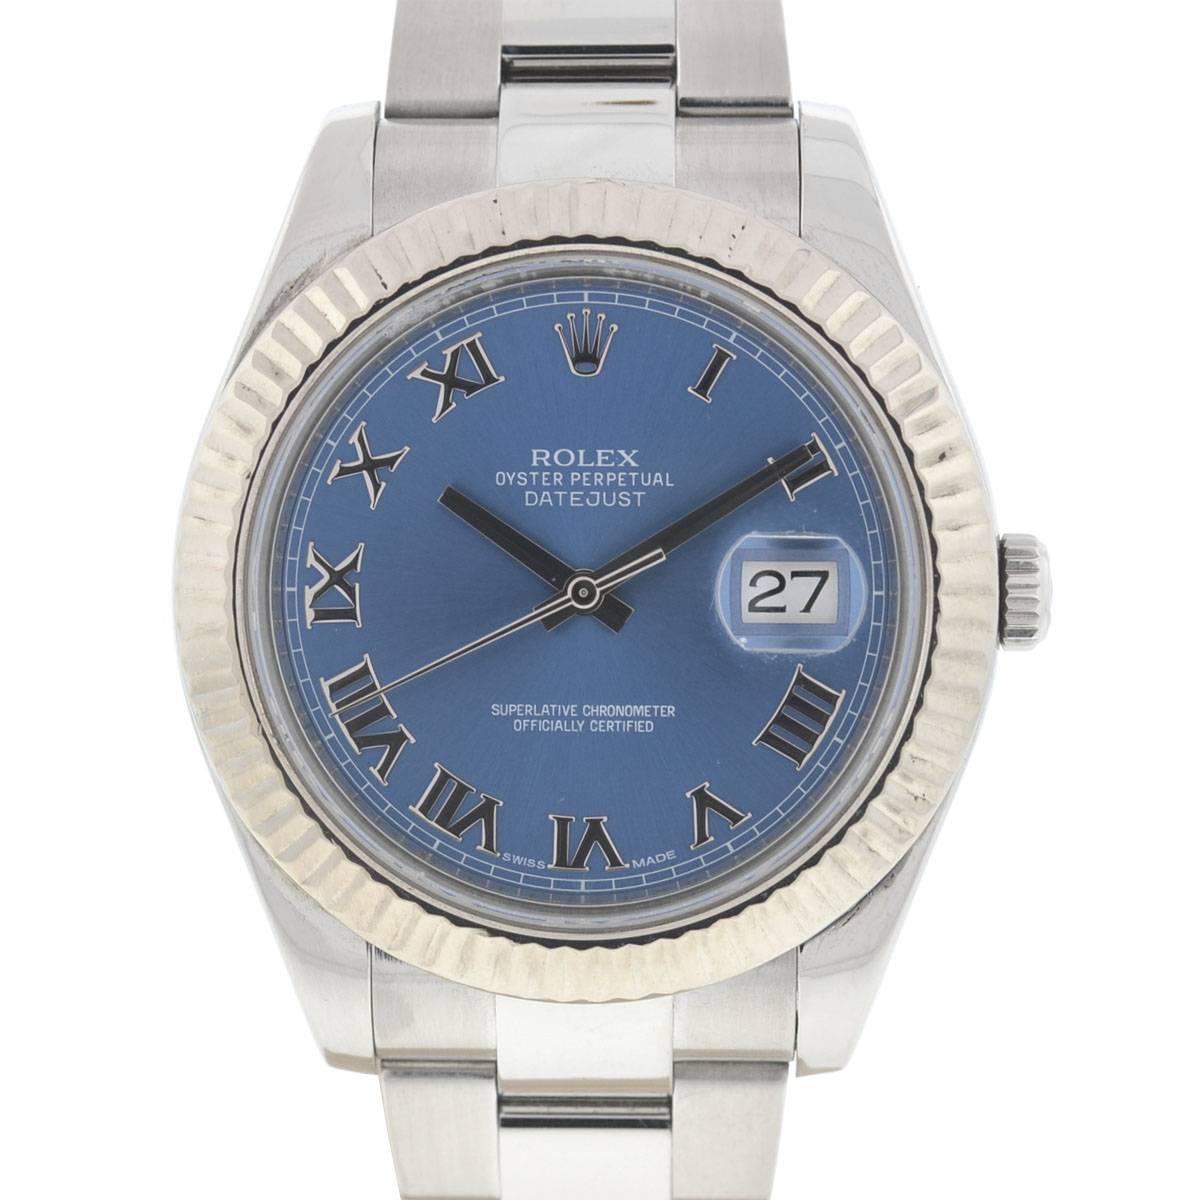 Company - Rolex
Style - Dress/Formal
Model - Datejust II
Reference Number - 116334 Random Serial
Case Metal - Stainless Steel
Case Measurement - 41 mm 
Bracelet - Stainless Steel - Fits up to a 6 3/4